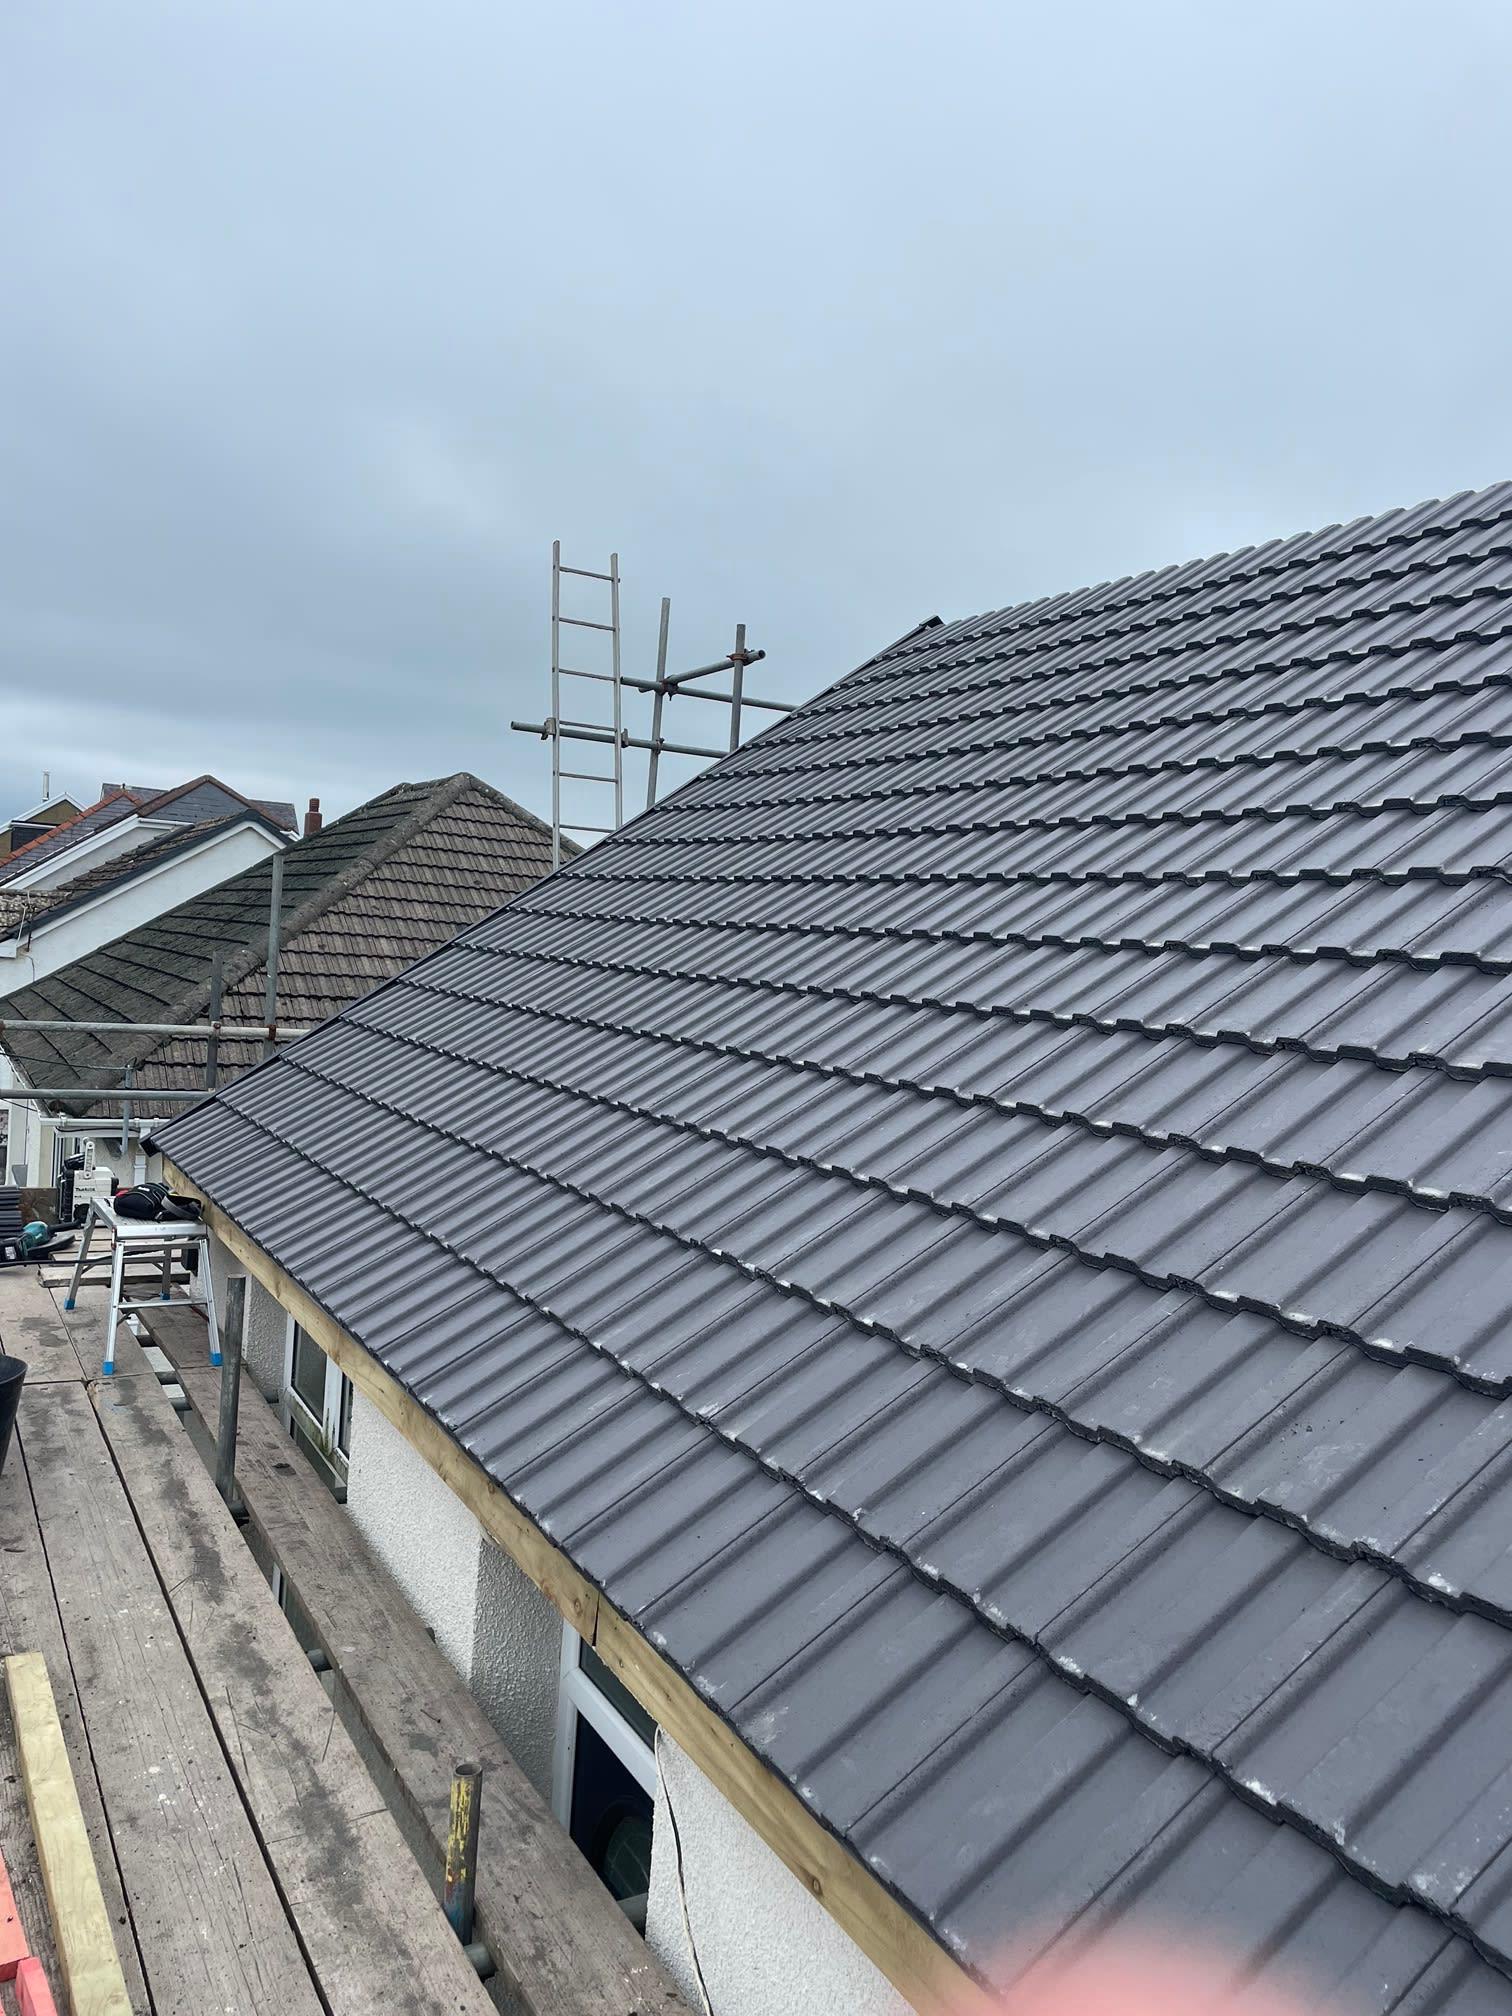 Images Paul Roberts Roofing